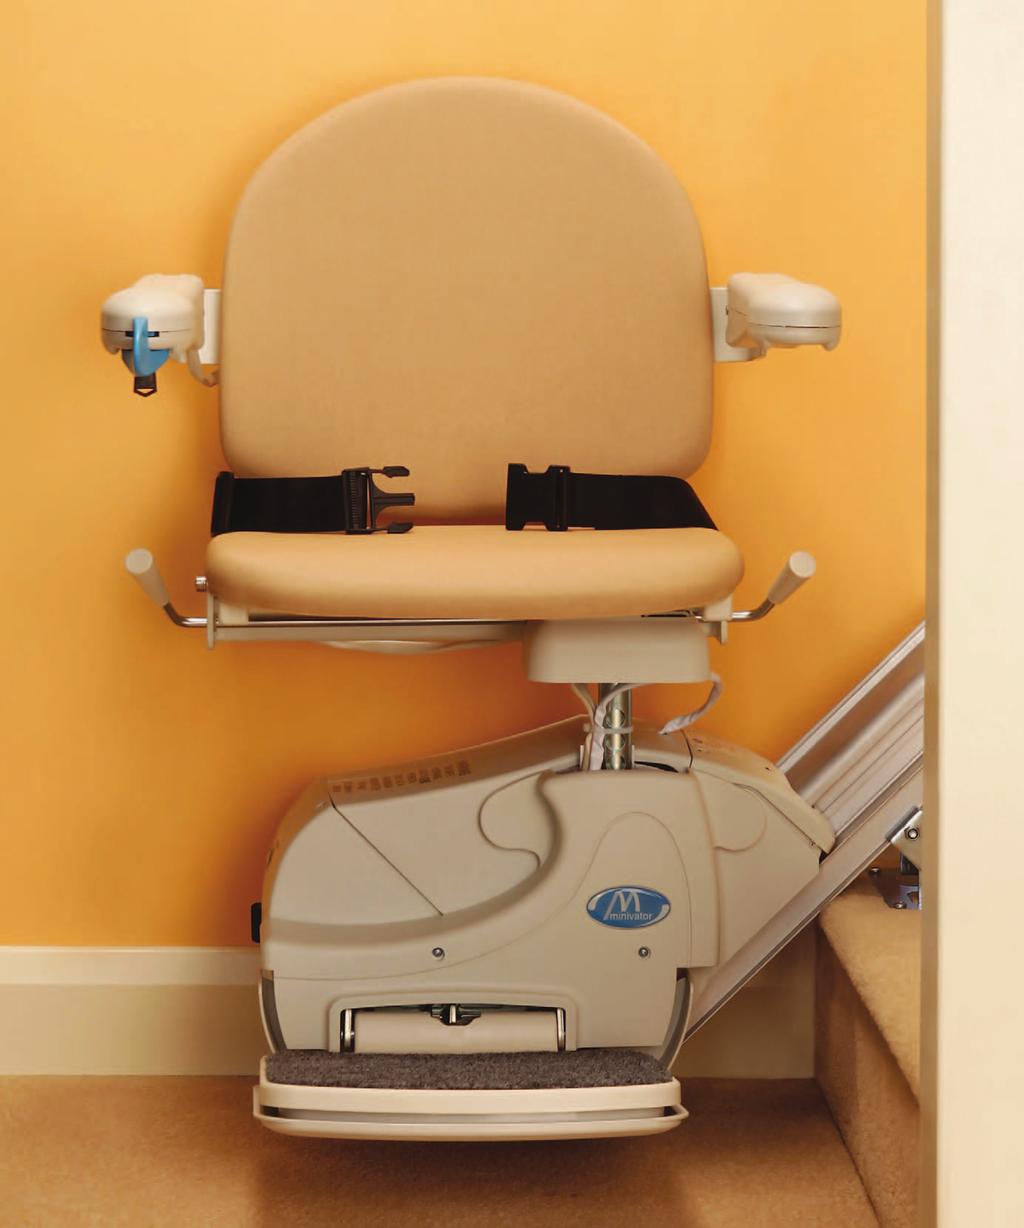 Simplicity Straight Stairlift If you do not require powered options, and you have a straight staircase, the Simplicity offers you a safe and cost effective way to overcome the challenge of climbing